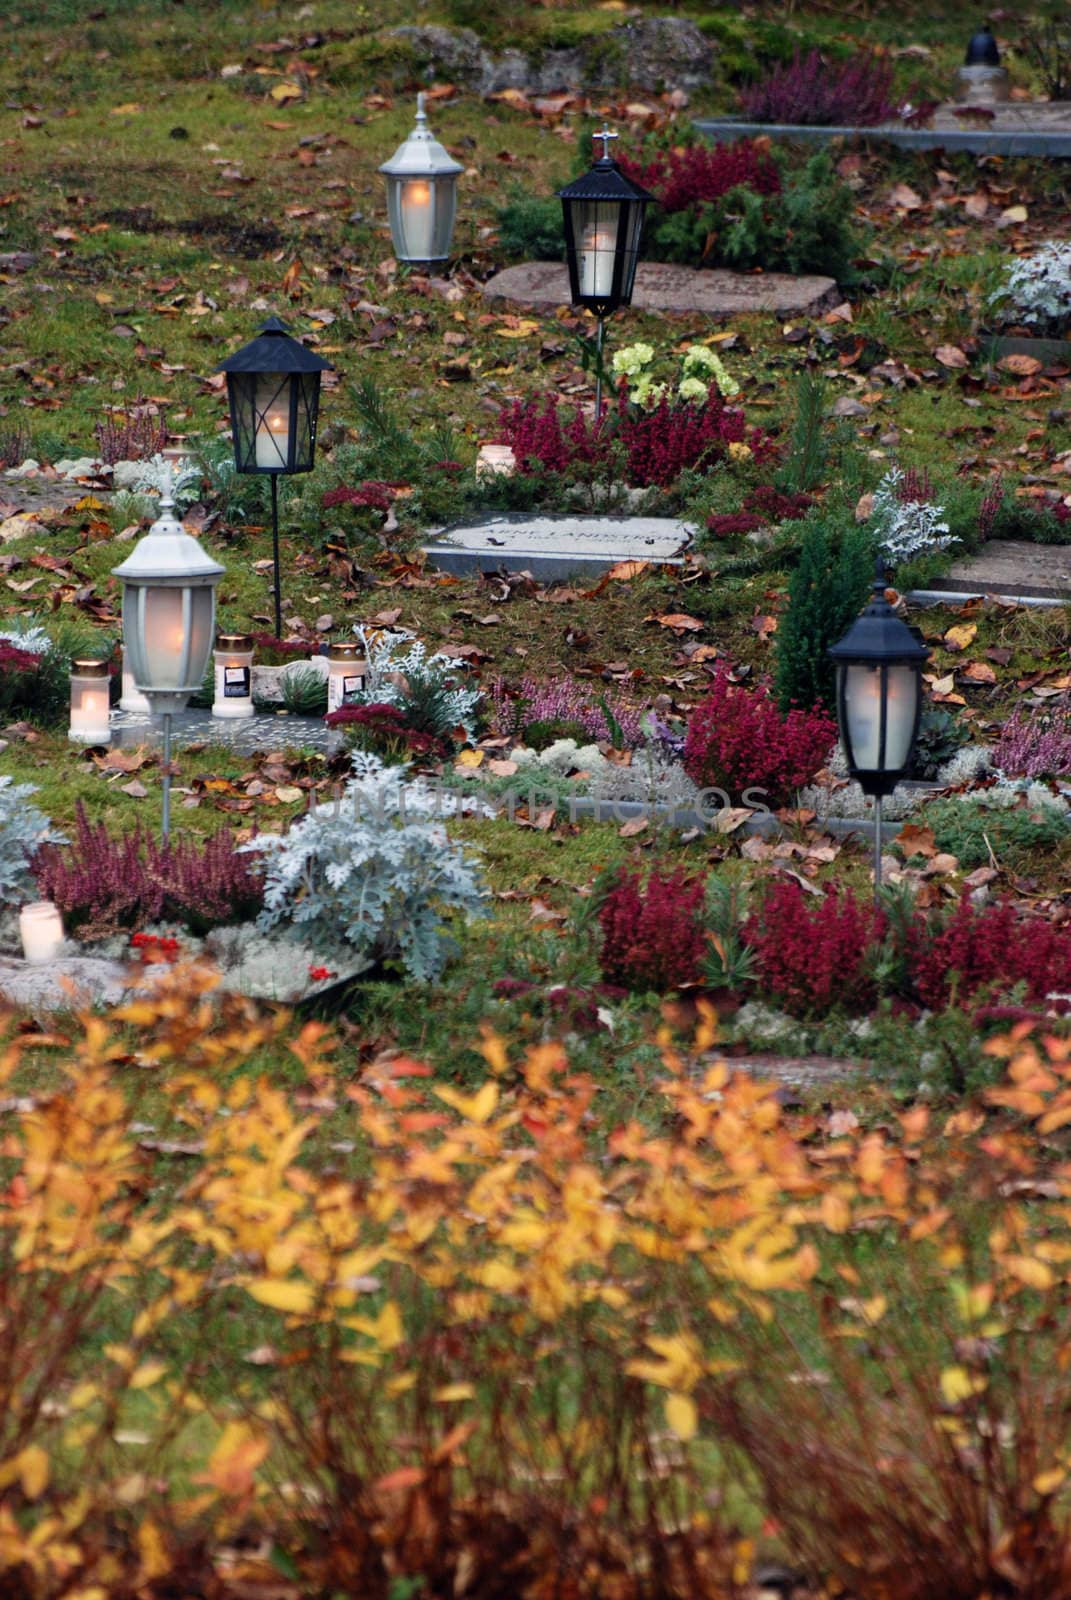 Graves at a cemetery where they lit candles to honor the dead